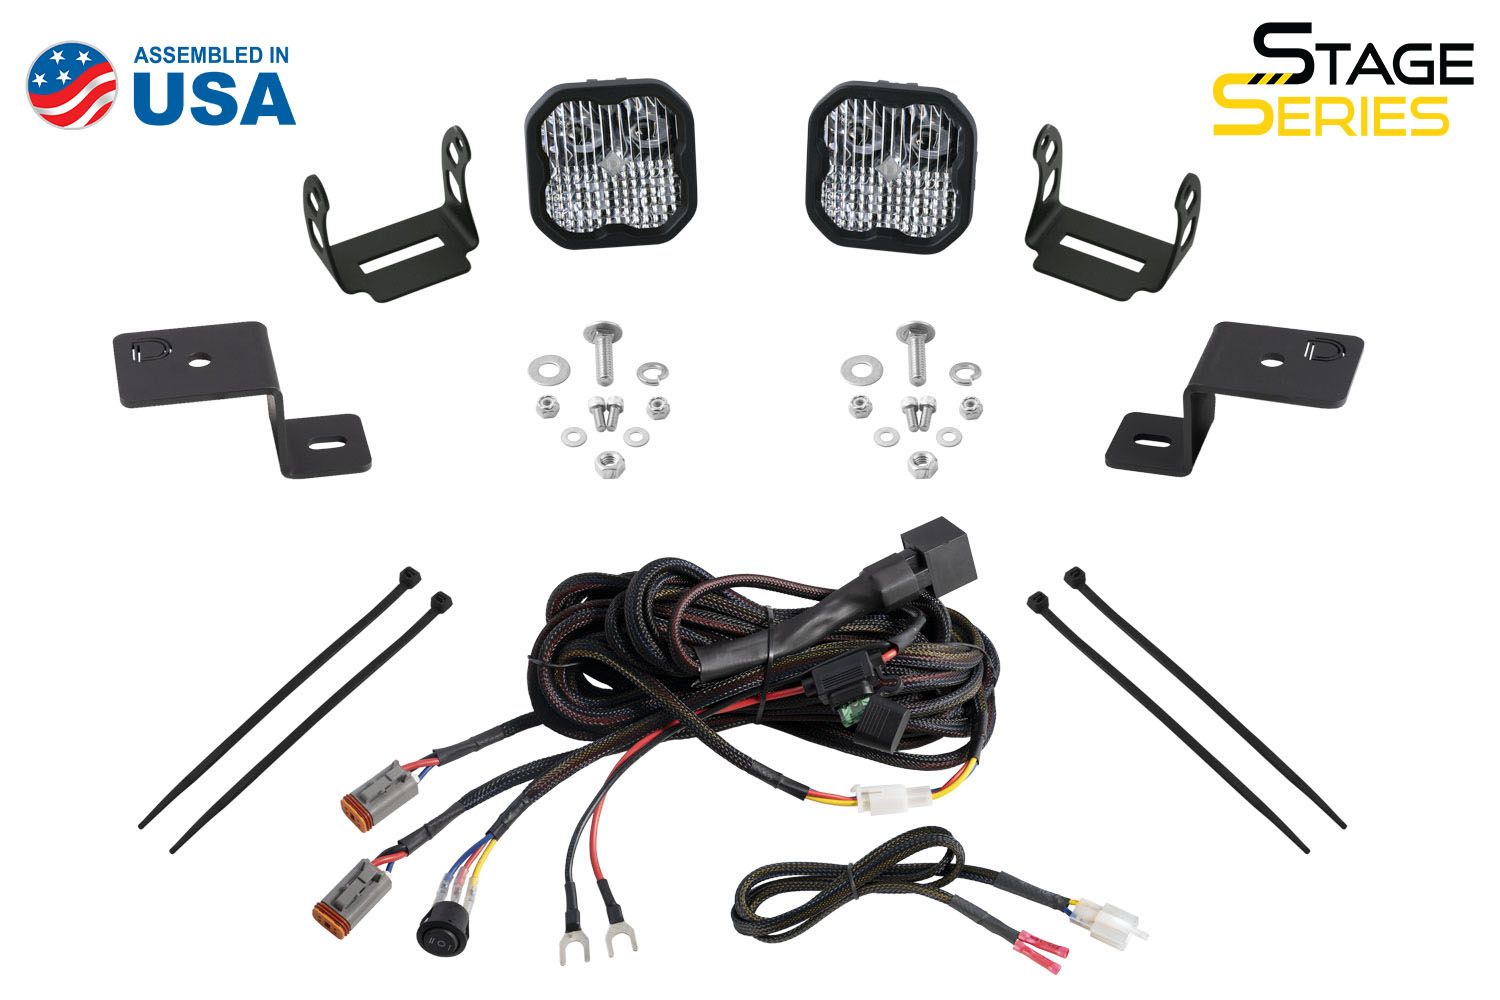 Stage Series Backlit Ditch Light Kit for 2021-2023 Ford F-150-DD7369